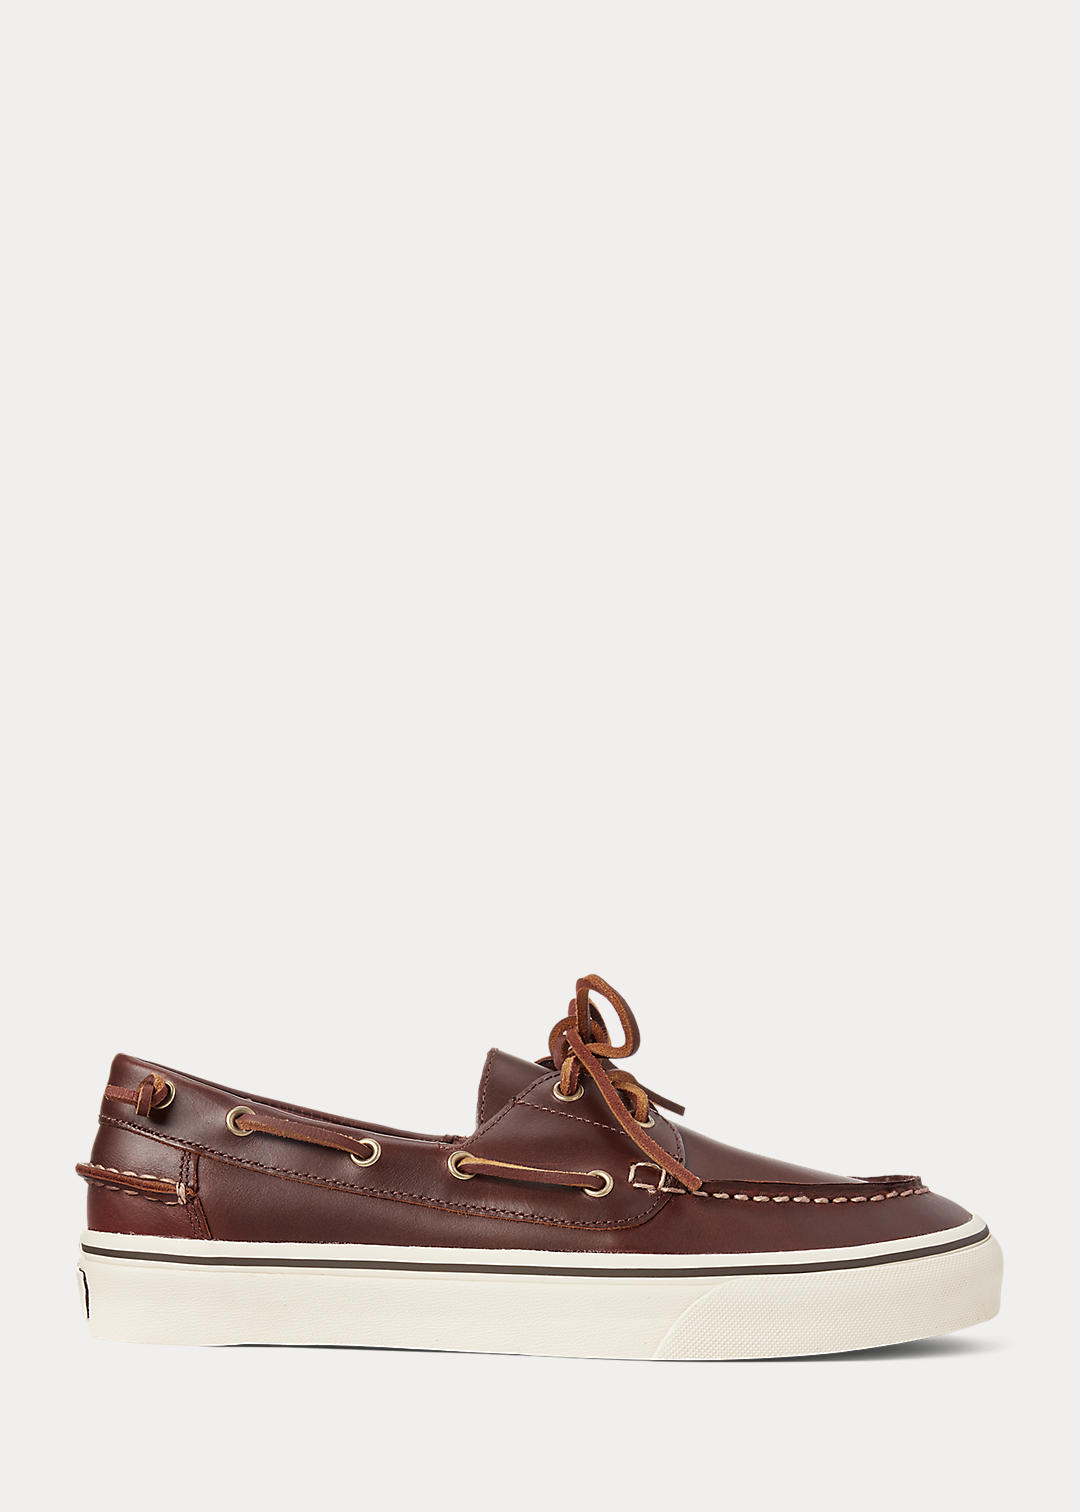 Total 77+ imagen polo boat shoes